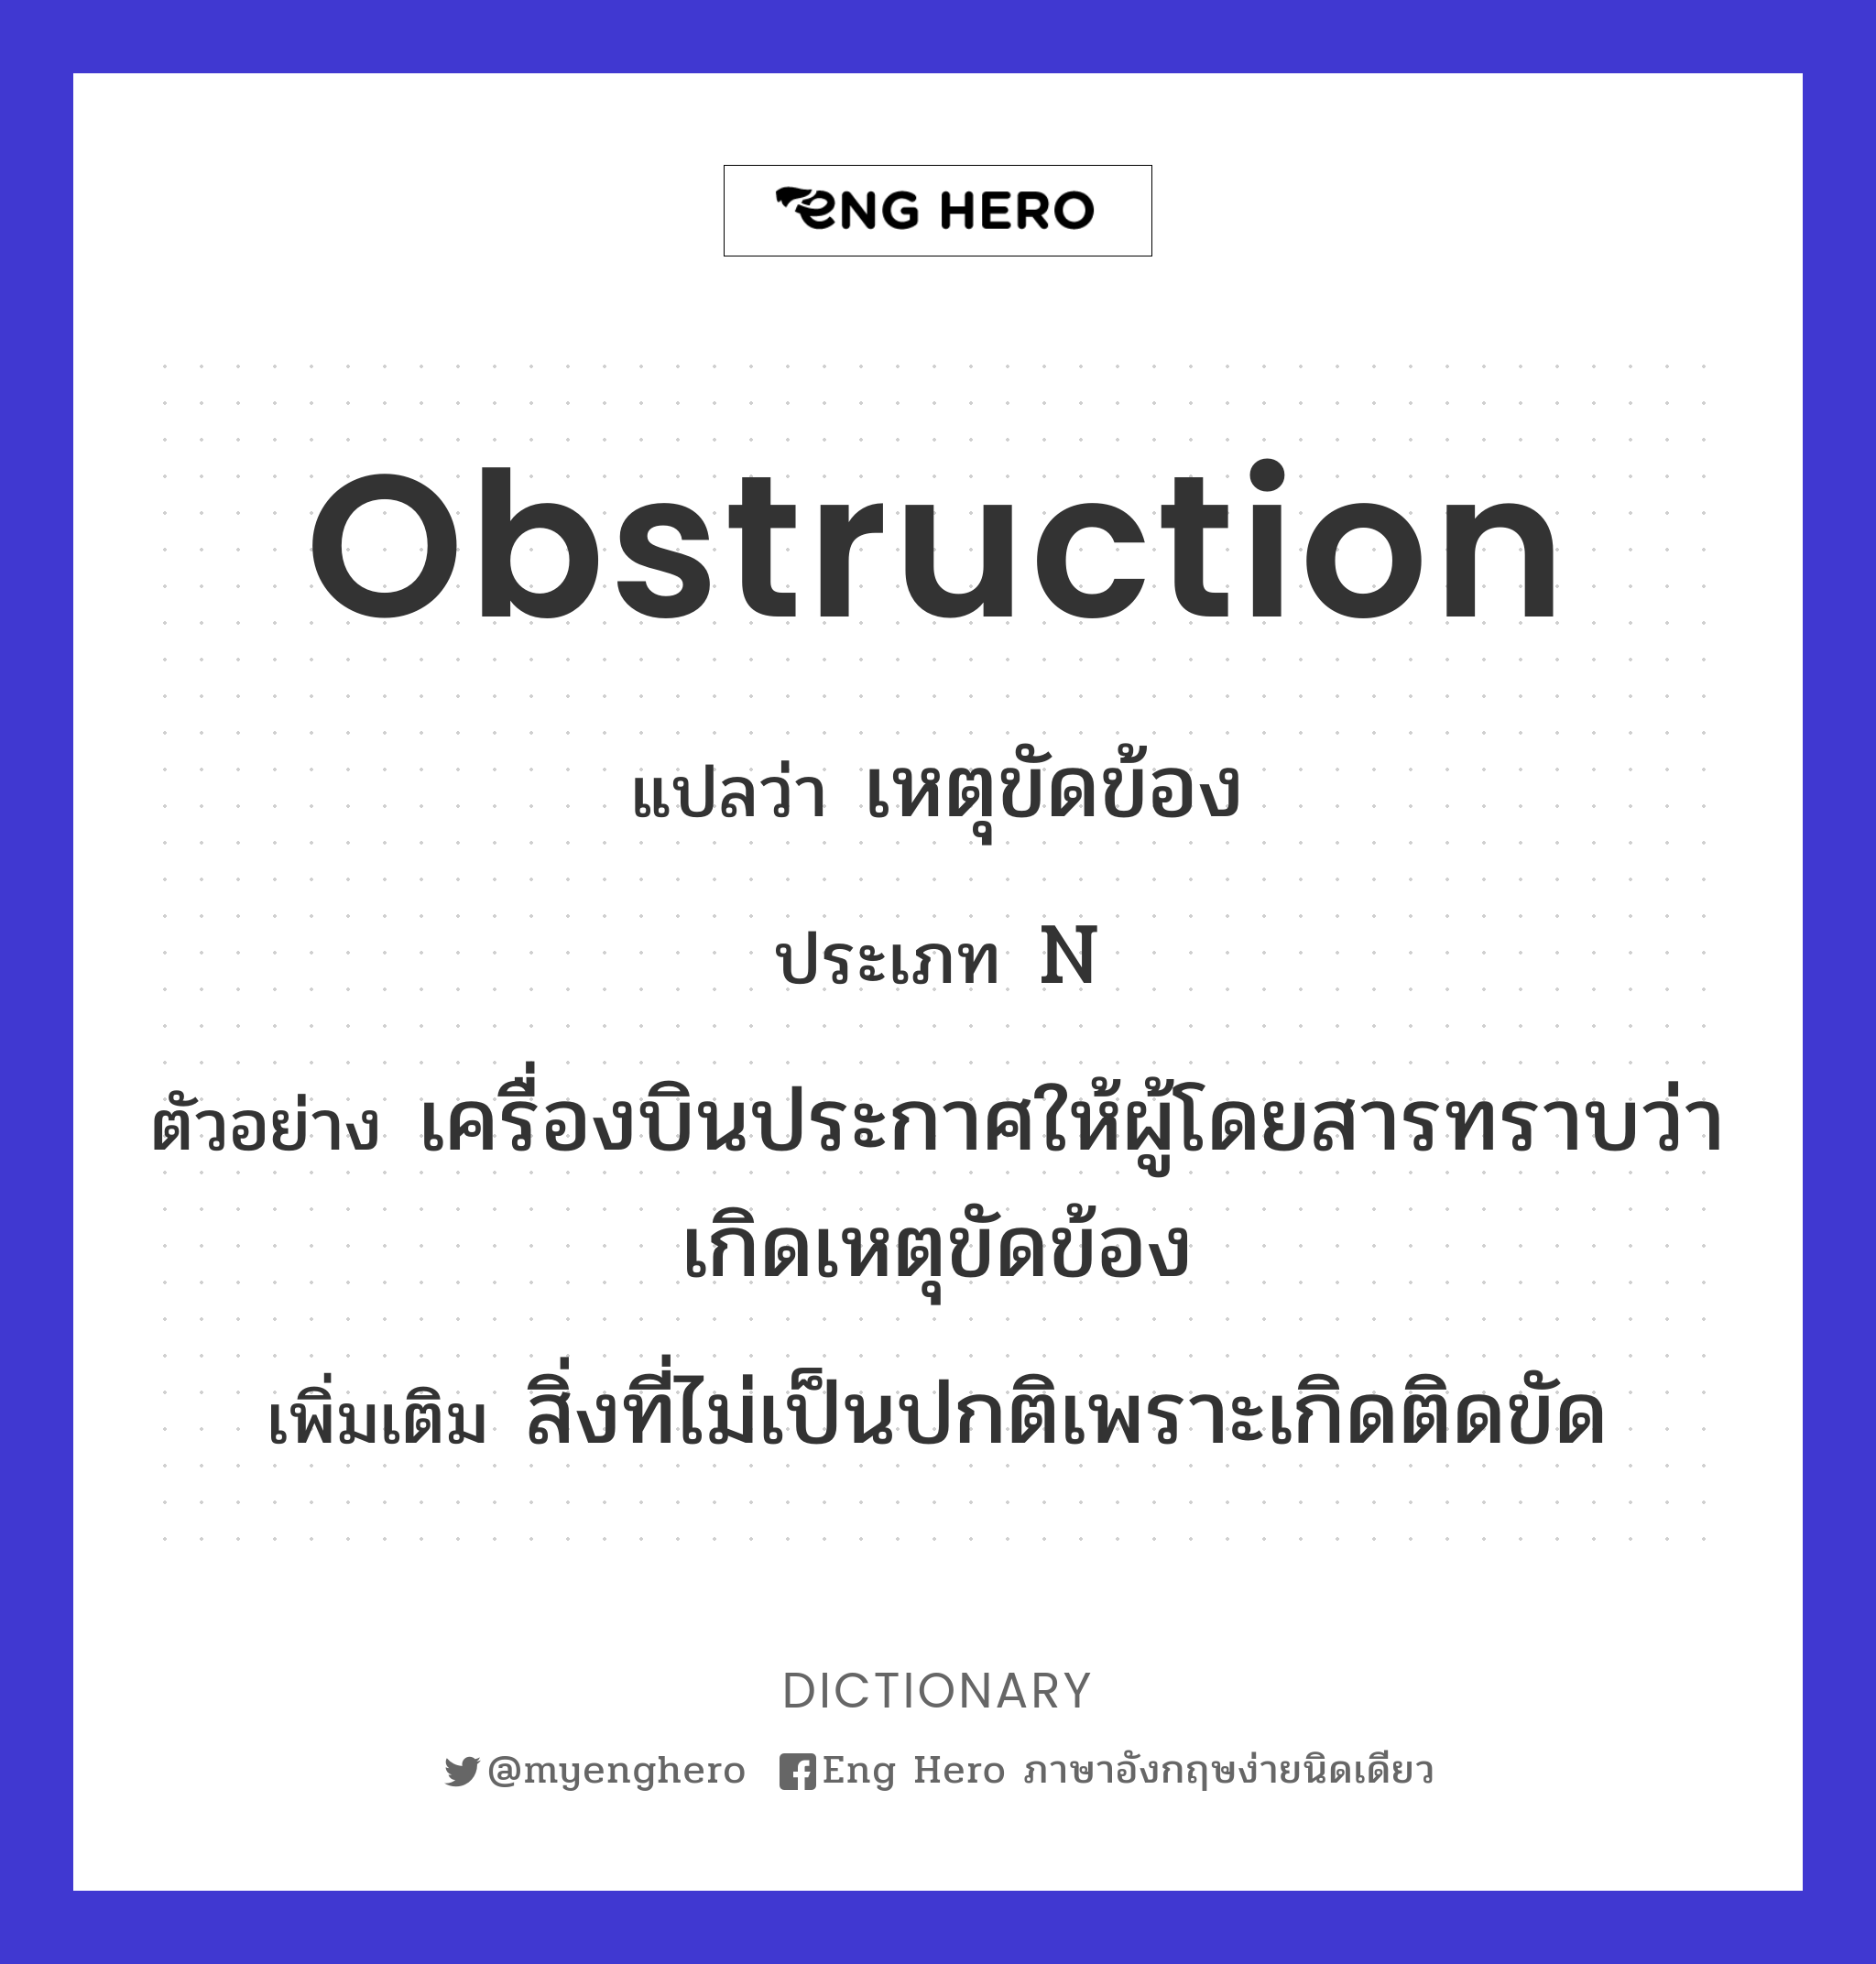 obstruction